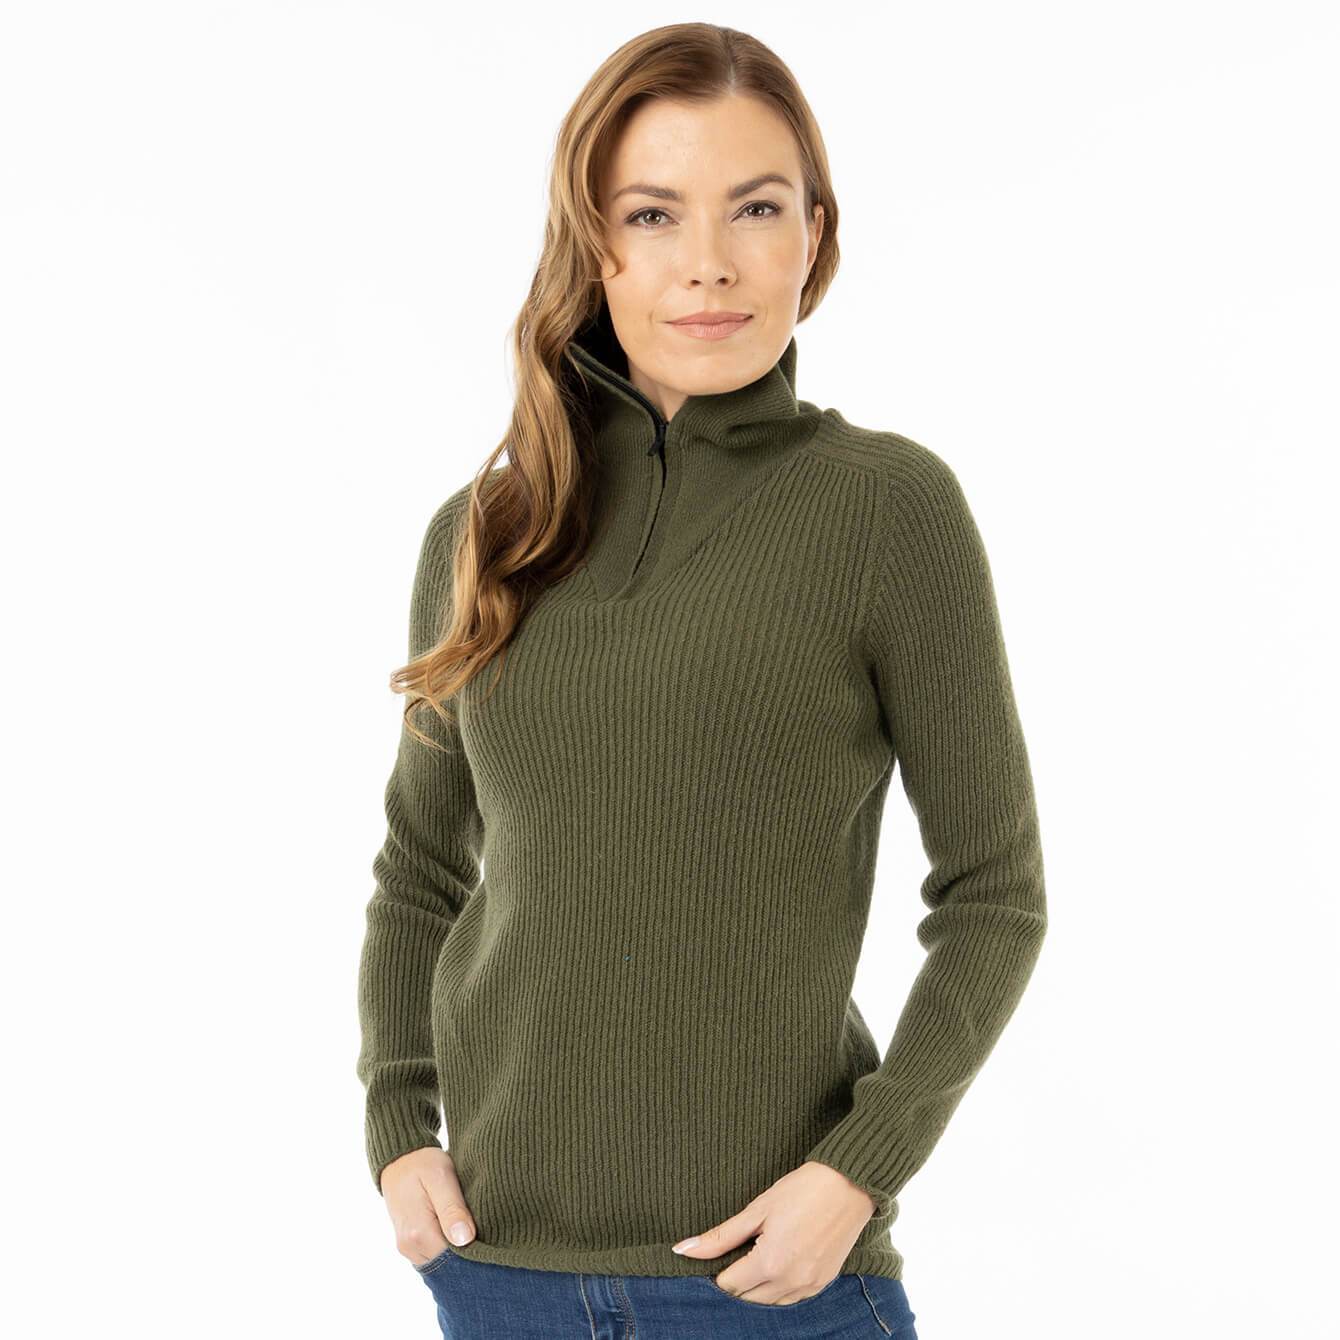 North Outdoor W's Metso Sweater - 100 % Merino Wool - Made in Finland Olive Green Shirt